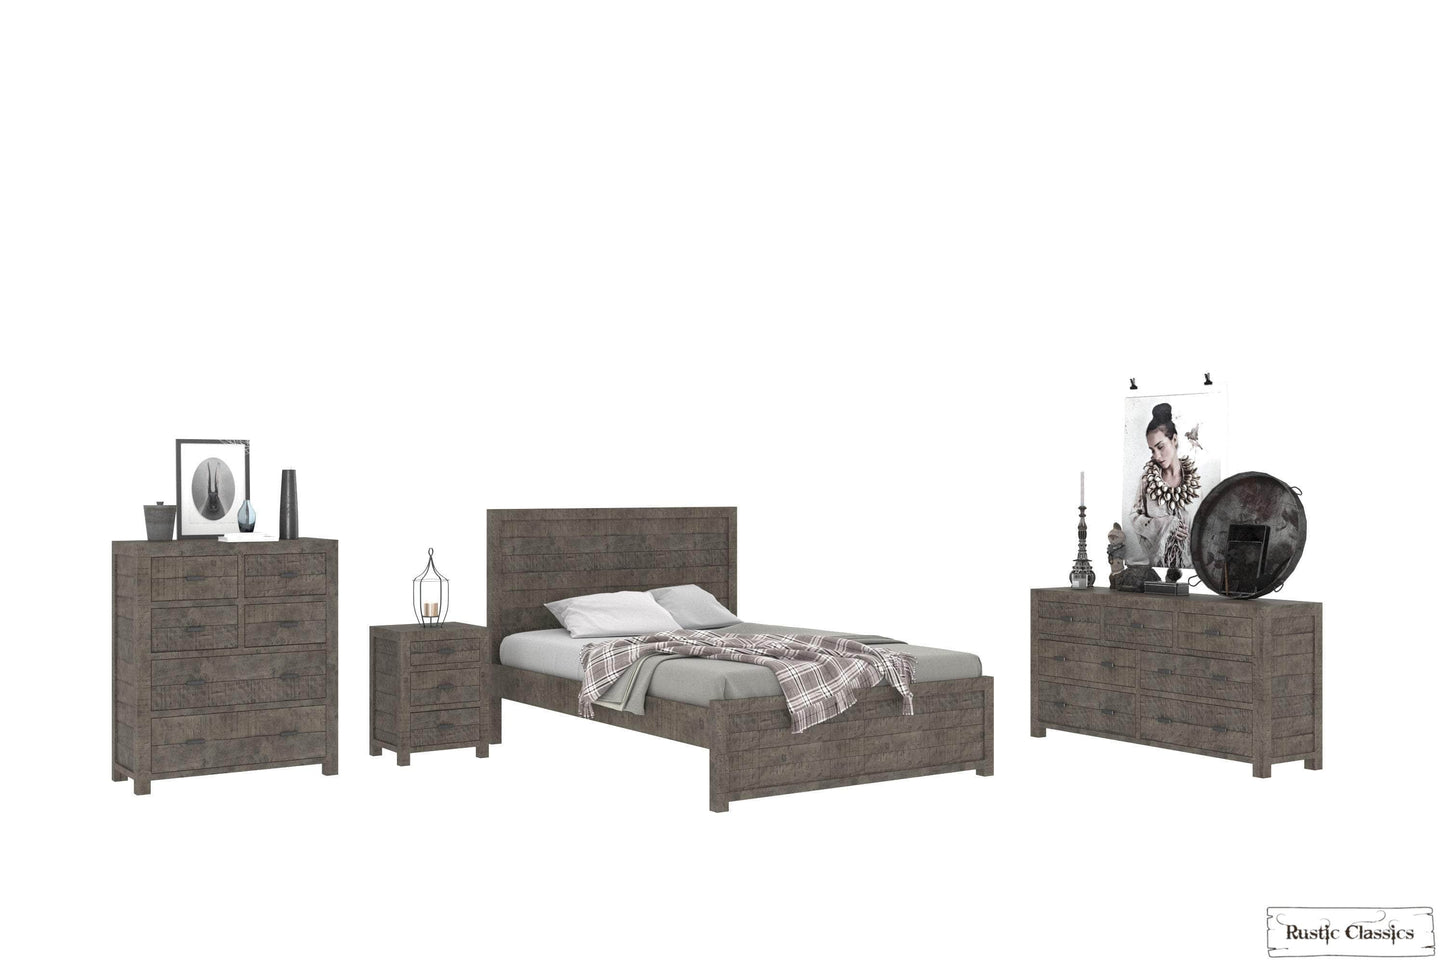 Pending - Rustic Classics Bedroom Set Whistler 4 Piece Reclaimed Wood Platform Bedroom Furniture Set in Grey - Available in 2 Sizes